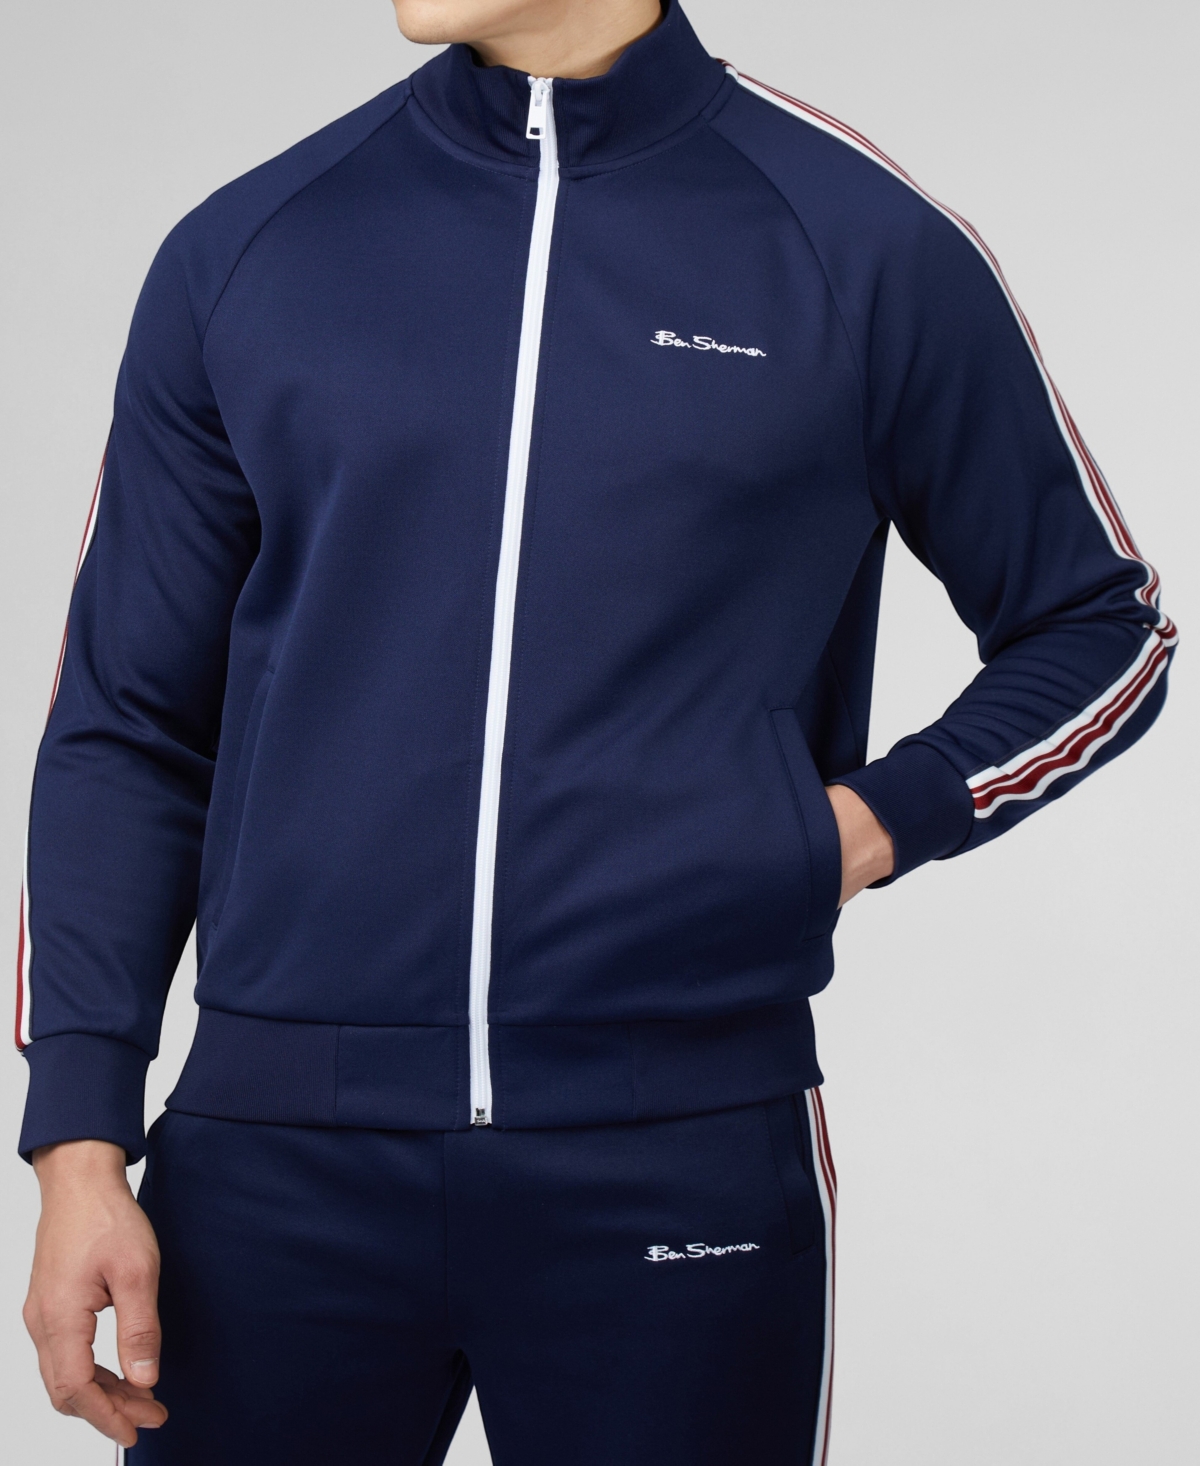 Men's Taped Tricot Track Top Jacket - Marine